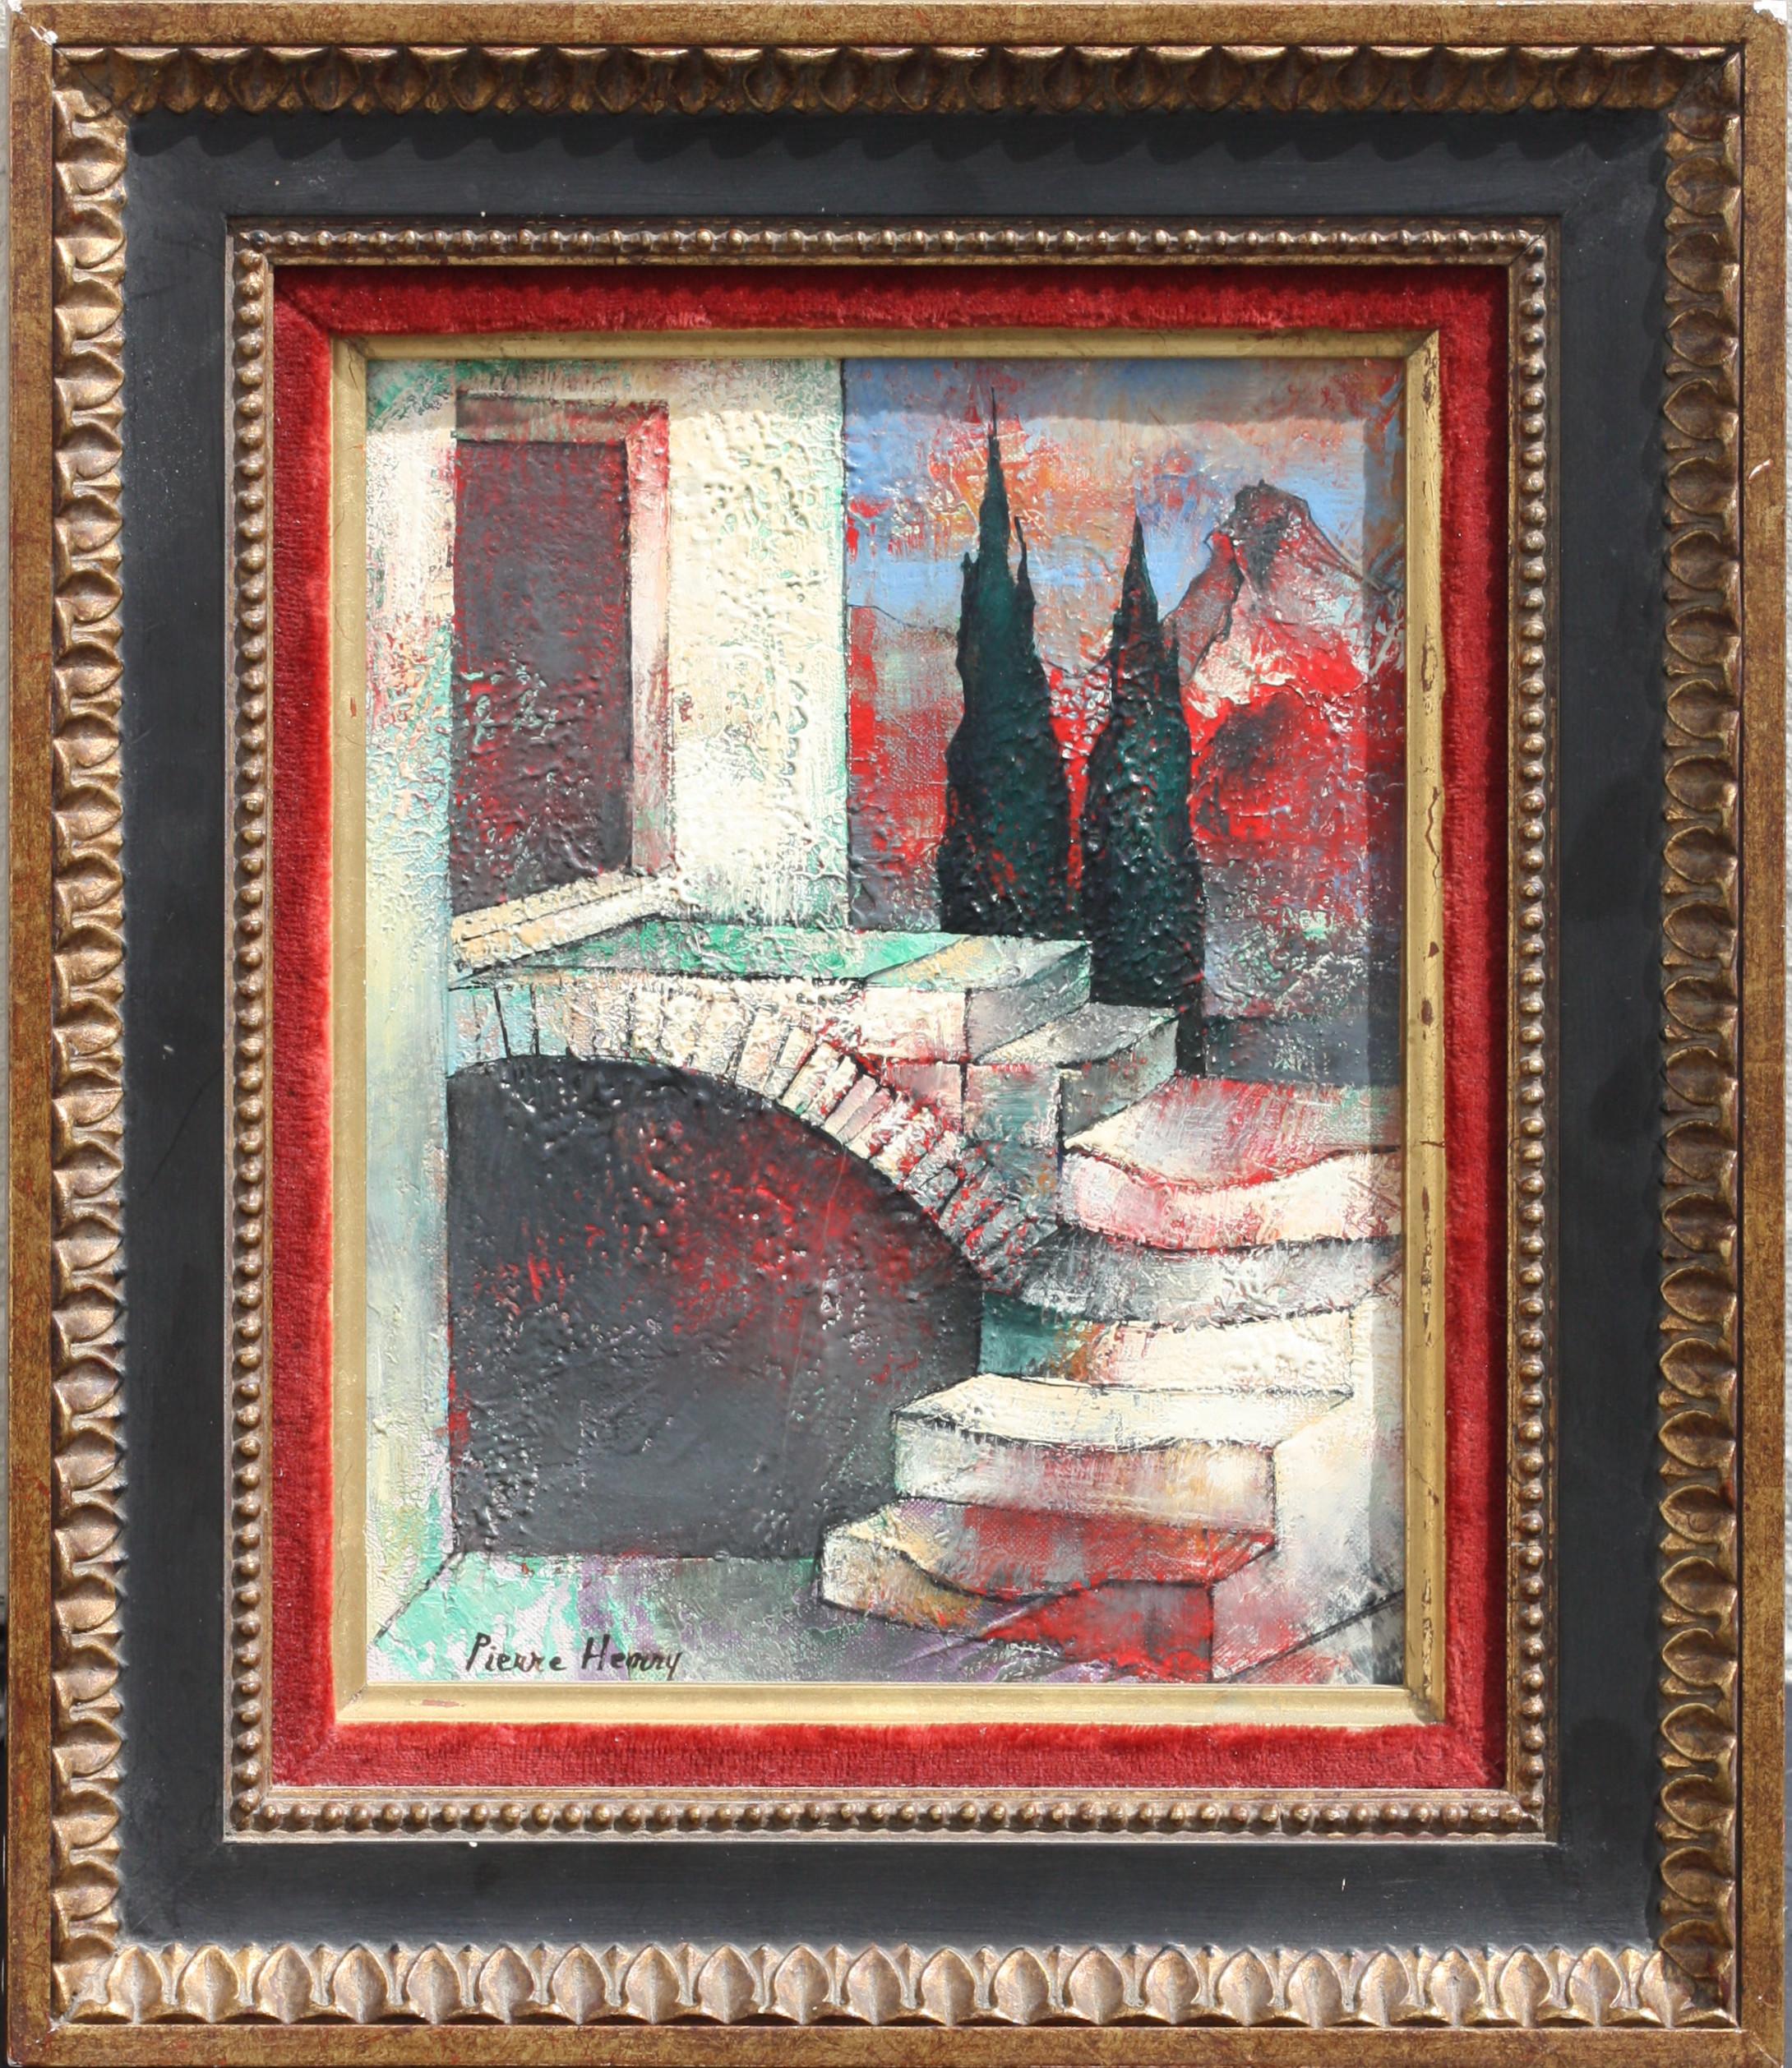 PIERRE-HENRY (1924-2015)
Painting, Oil on canvas
9.5 x 7.5 in. (24.13 x 19.05 cm.) 
with frame
13.5 x 11.5 in. (34.29 x 29.21 cm.)
